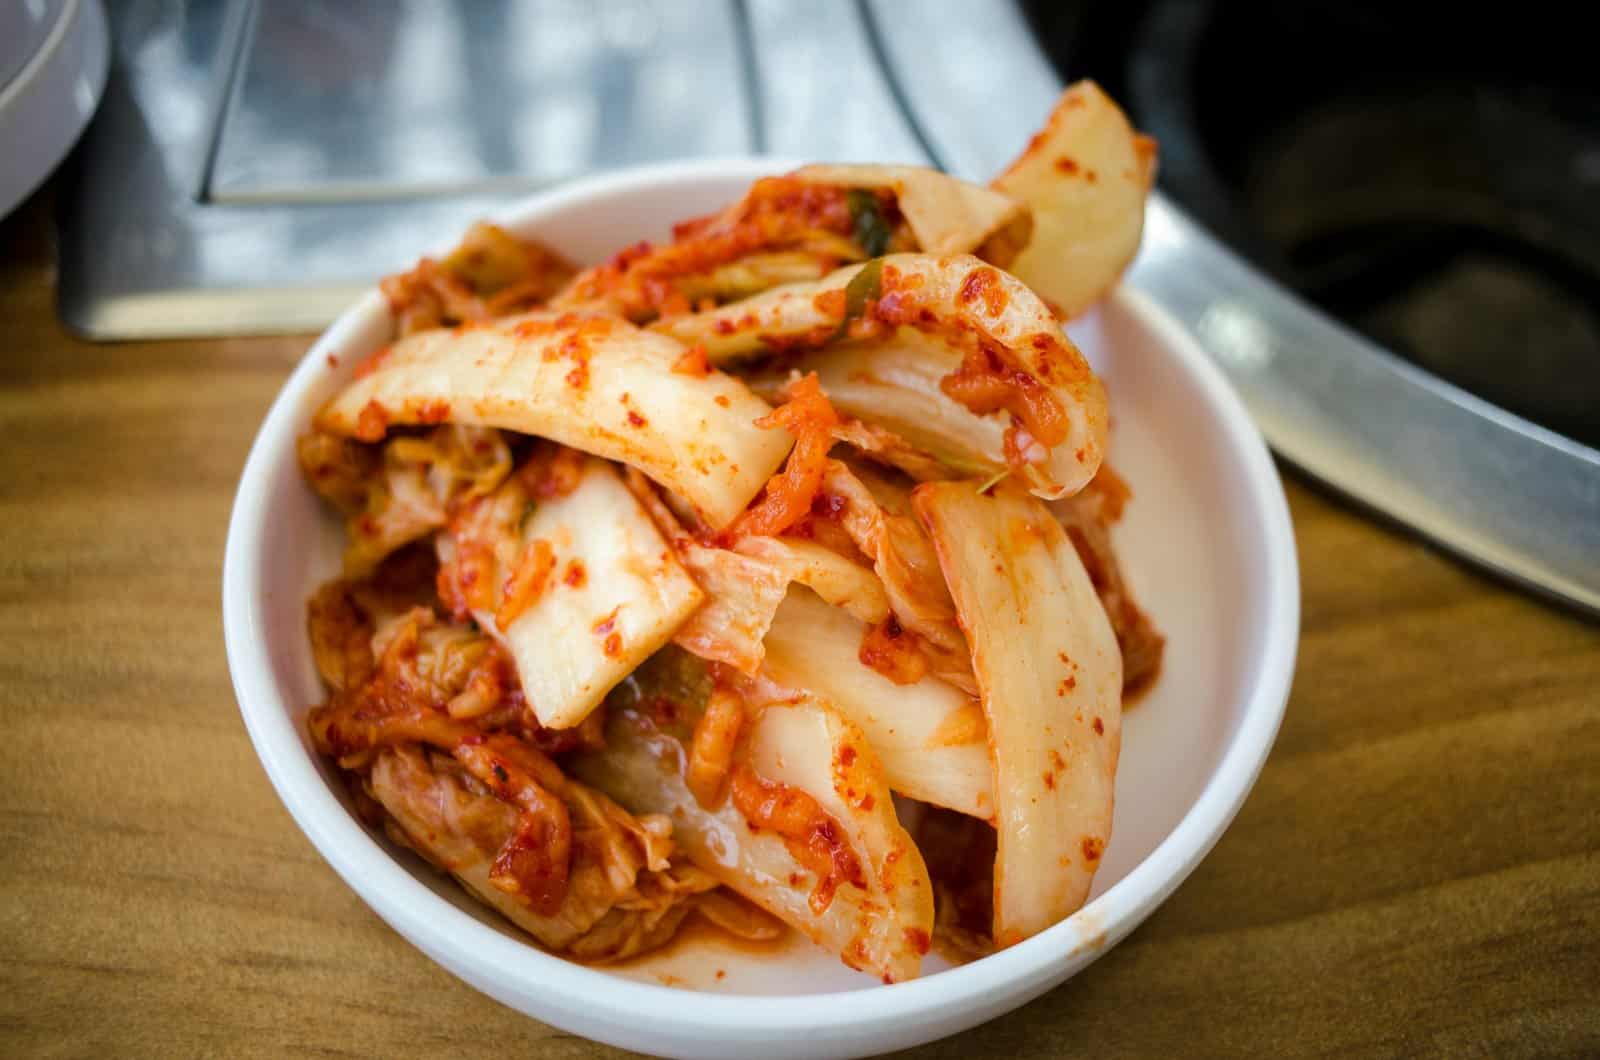 Image Credit: Pexels / makafood <p><span>Experience the dynamic flavors of Korean cuisine in Seoul, from spicy kimchi and bibimbap to savory Korean barbecue. Don’t miss exploring the city’s lively food markets and trendy neighborhoods for a taste of modern Korean cuisine.</span></p>